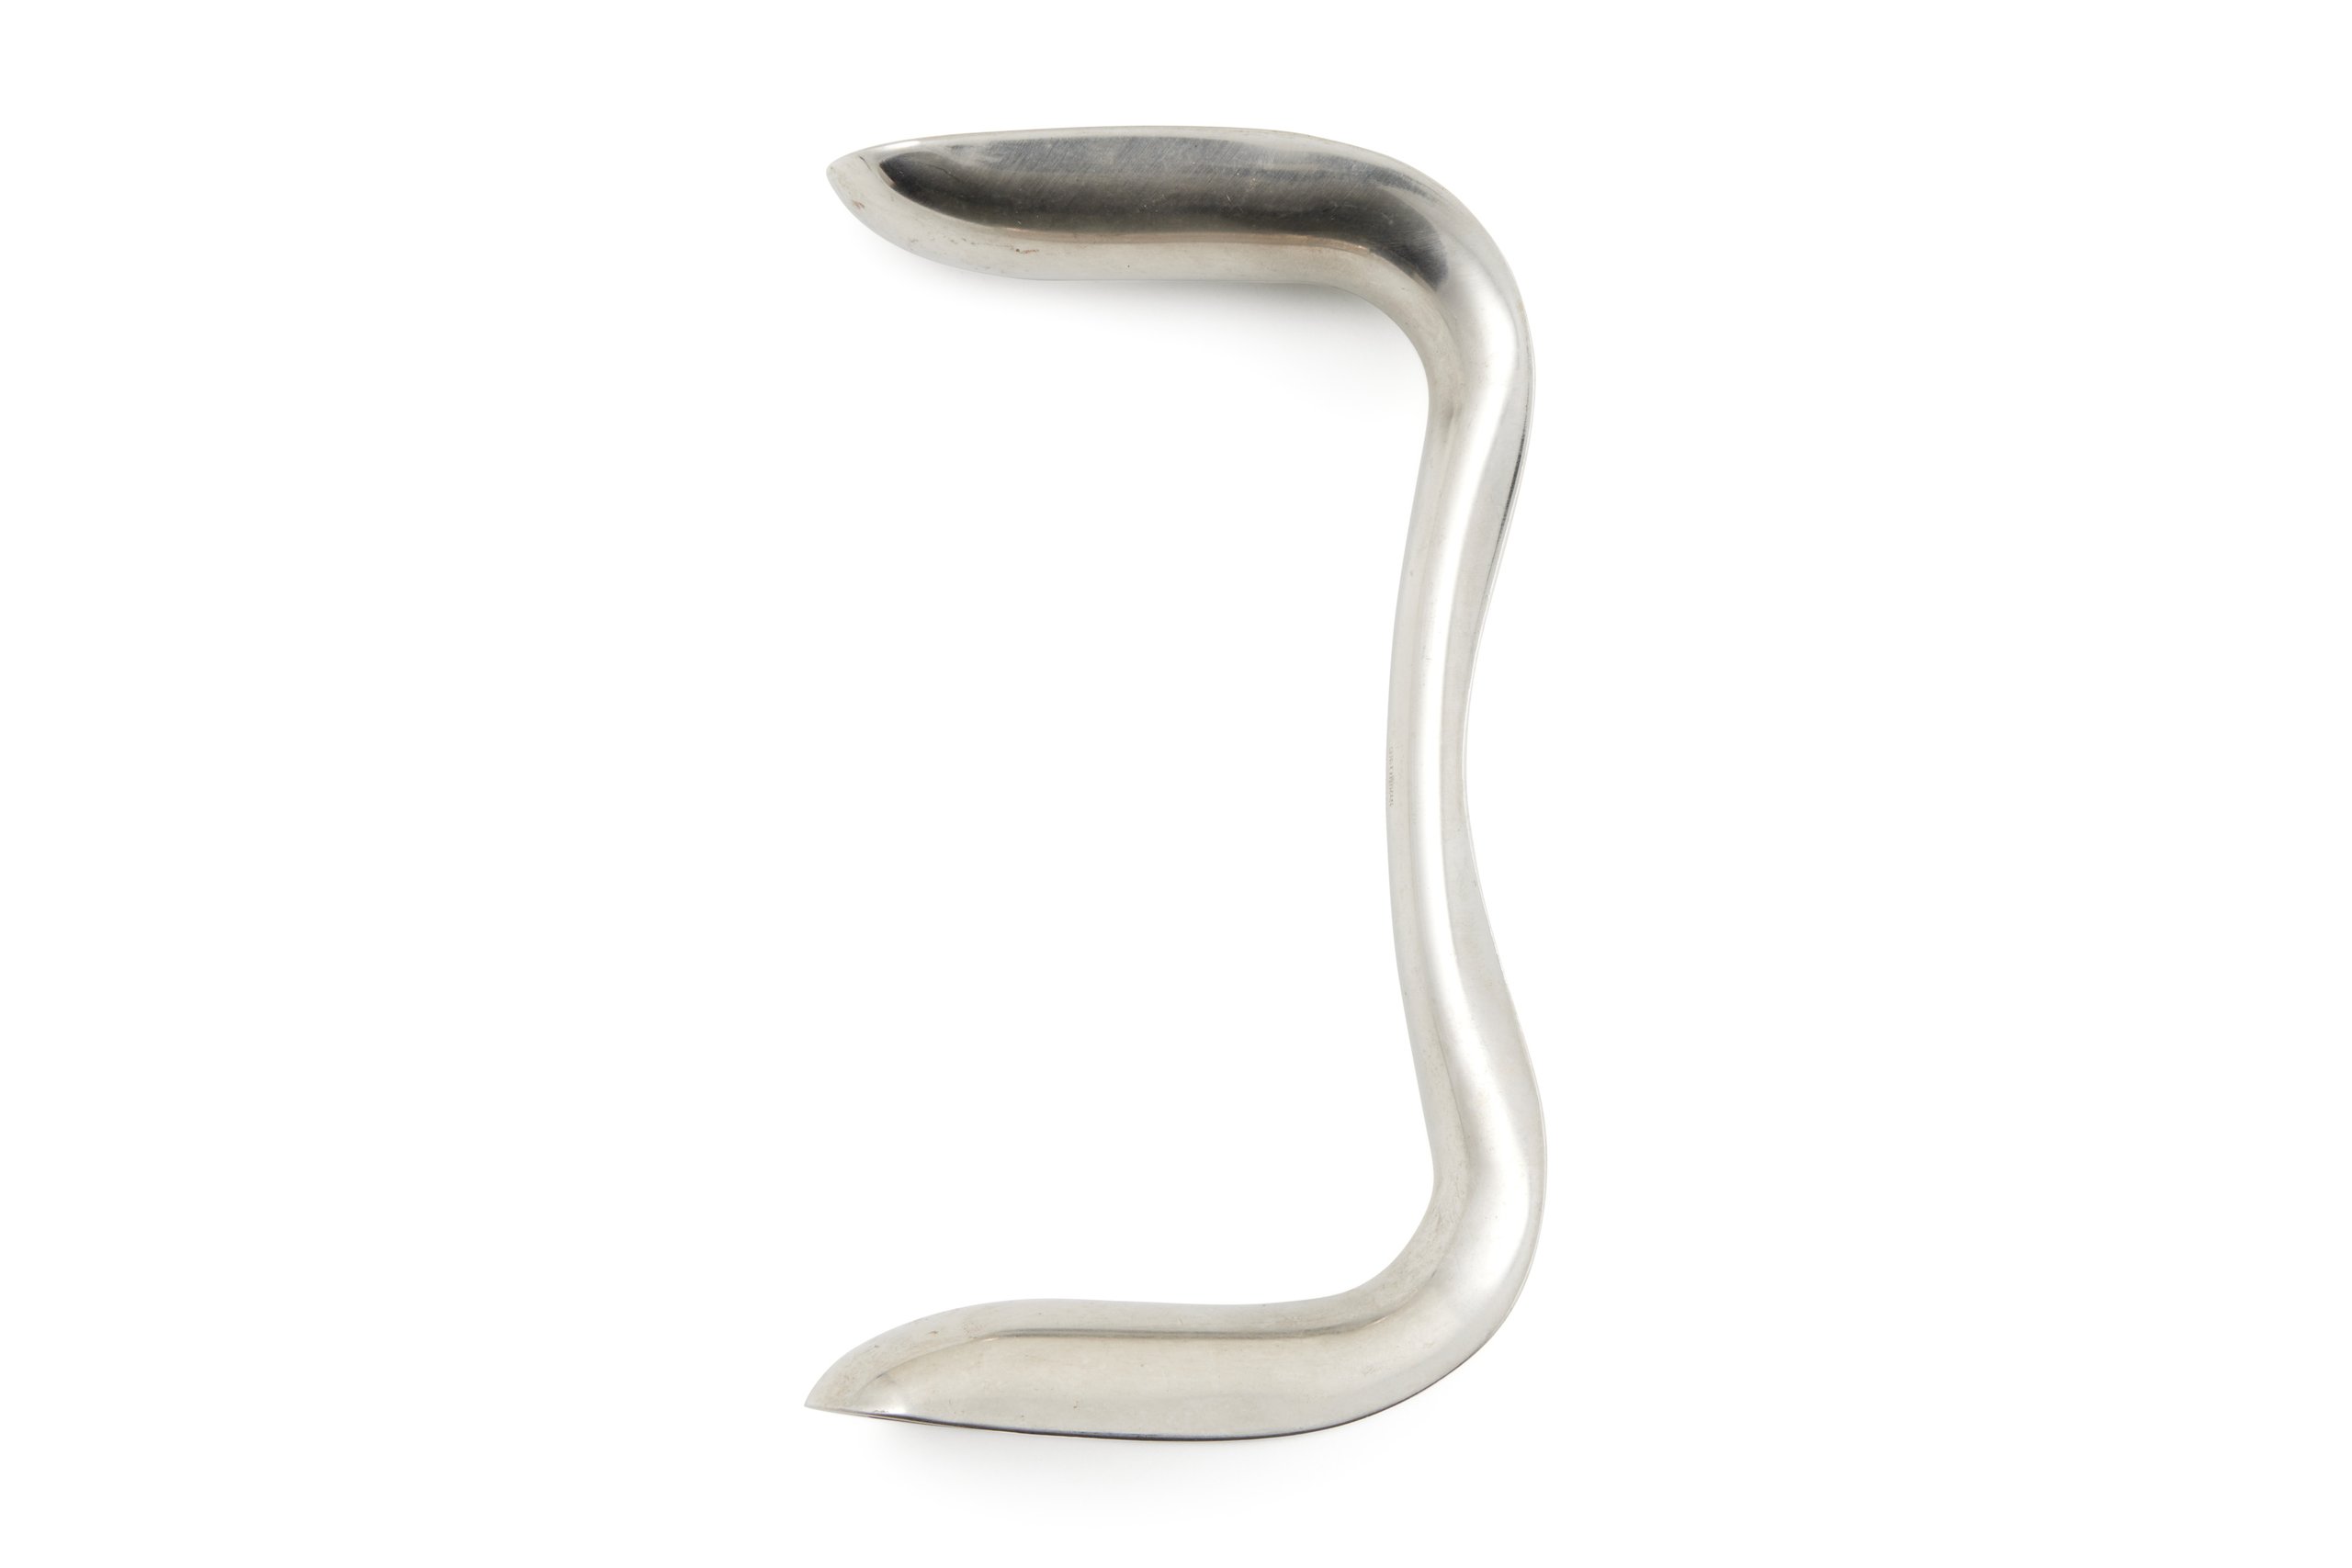 Sims speculum used by Dr Geoffrey Davis